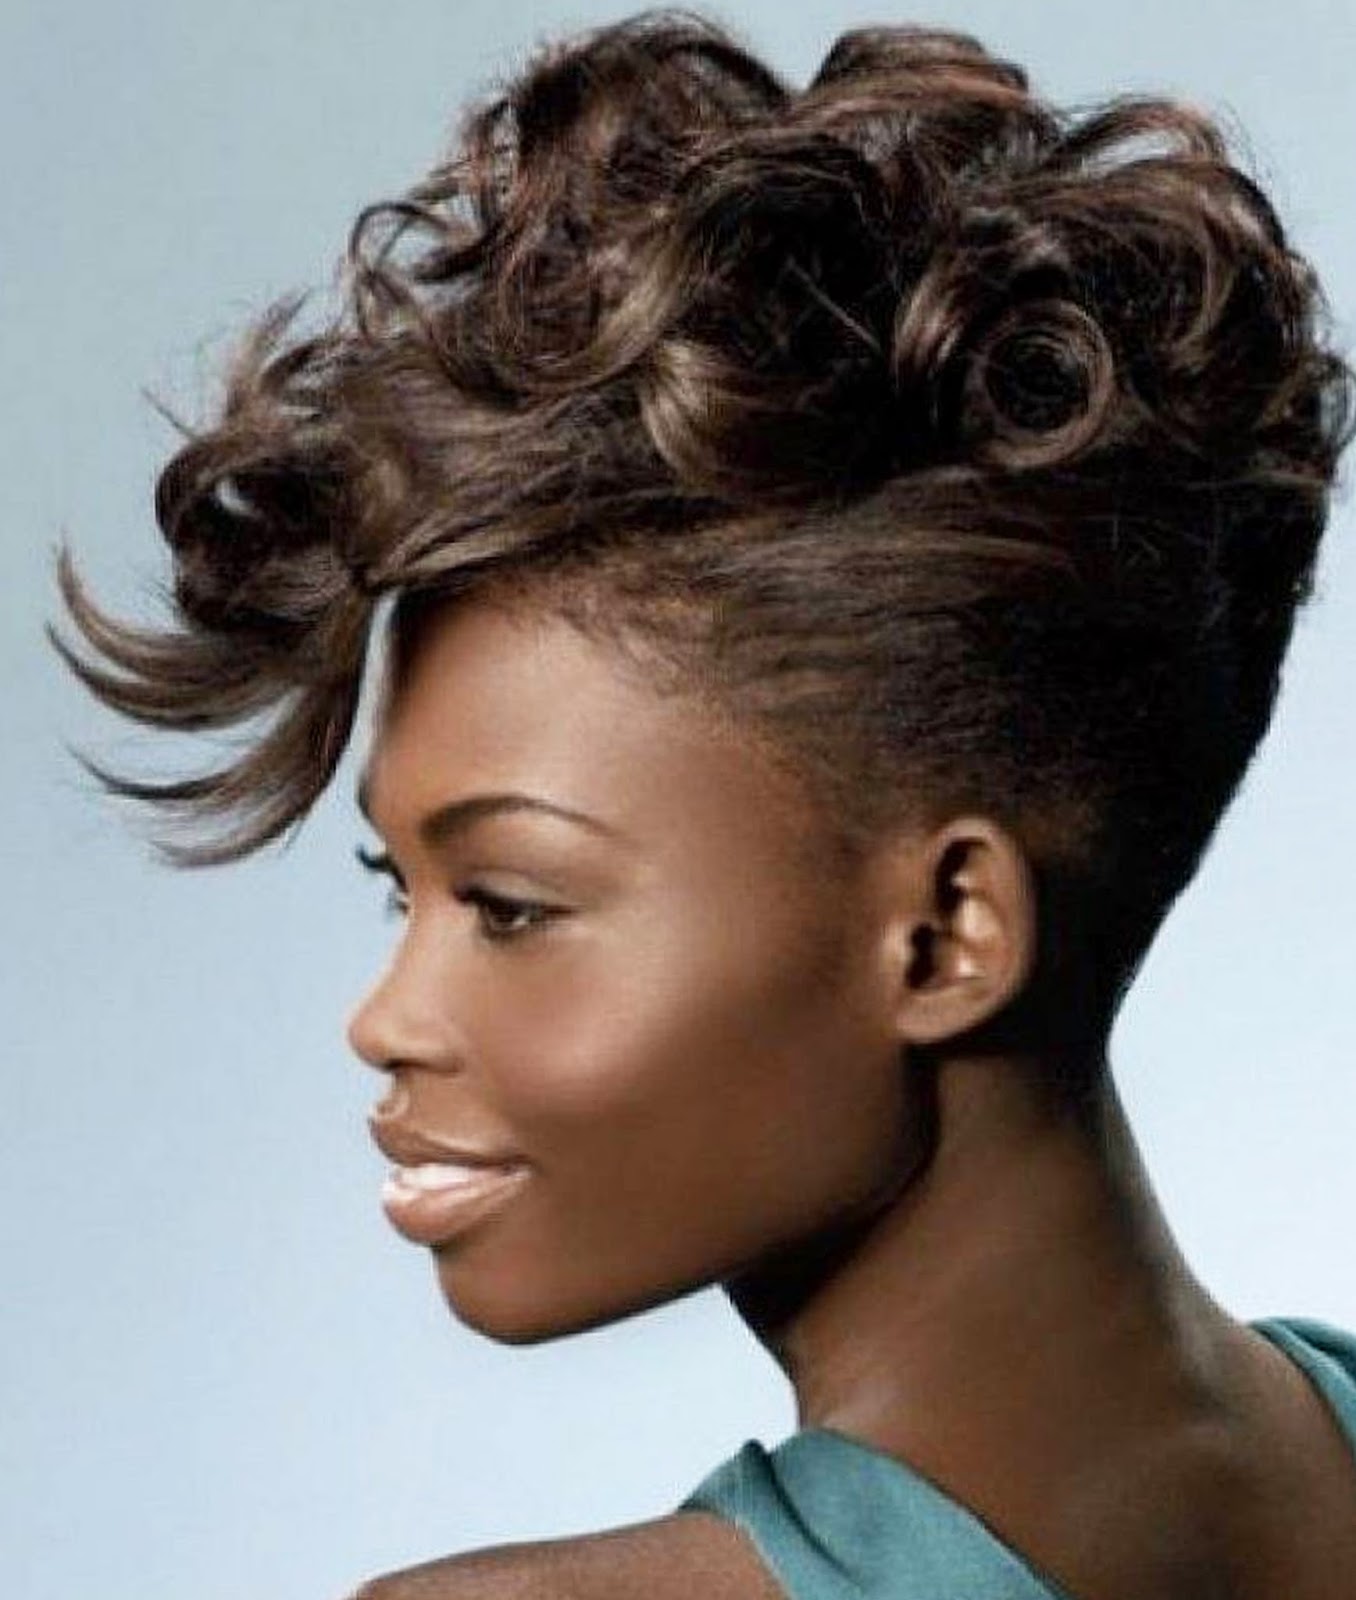 Stunning short French haircut Oval face African American